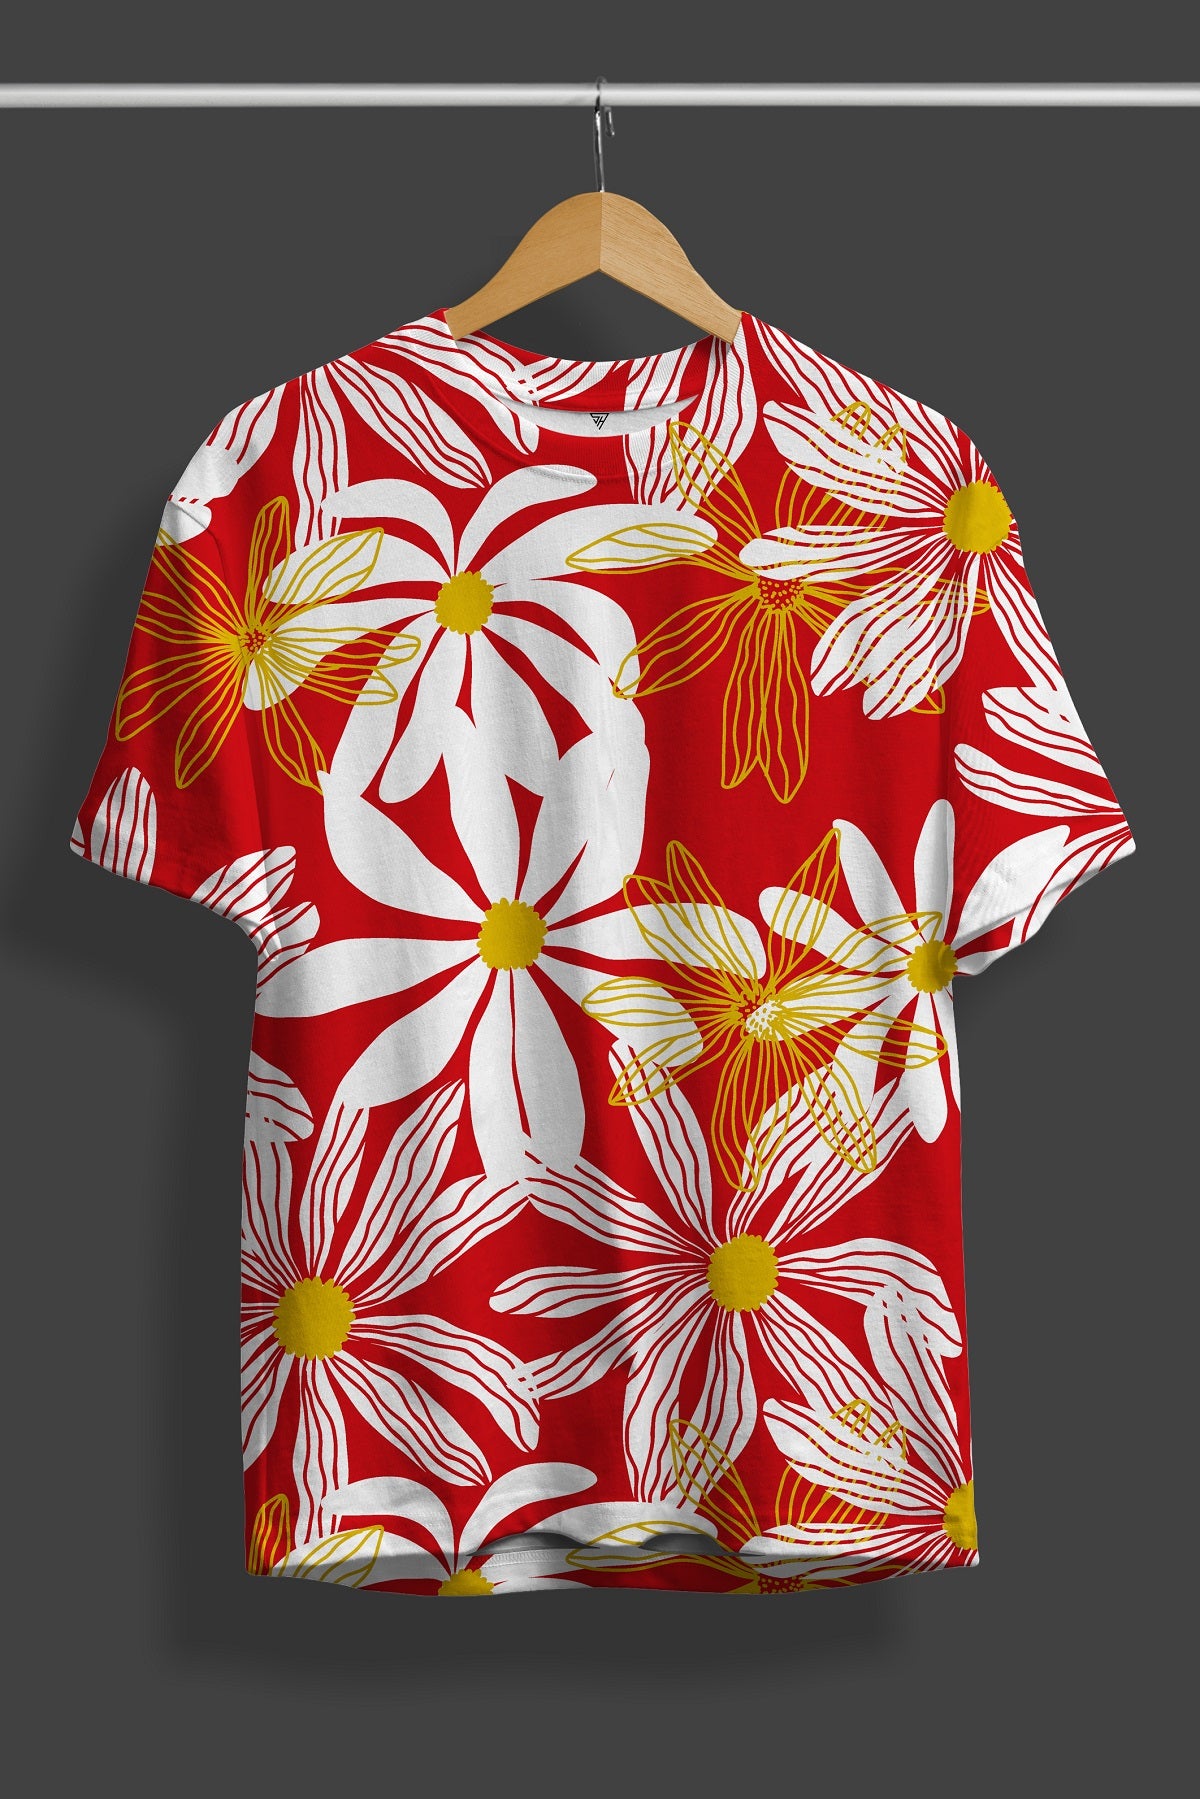 Unisex Floral Red Full Printed T-Shirt